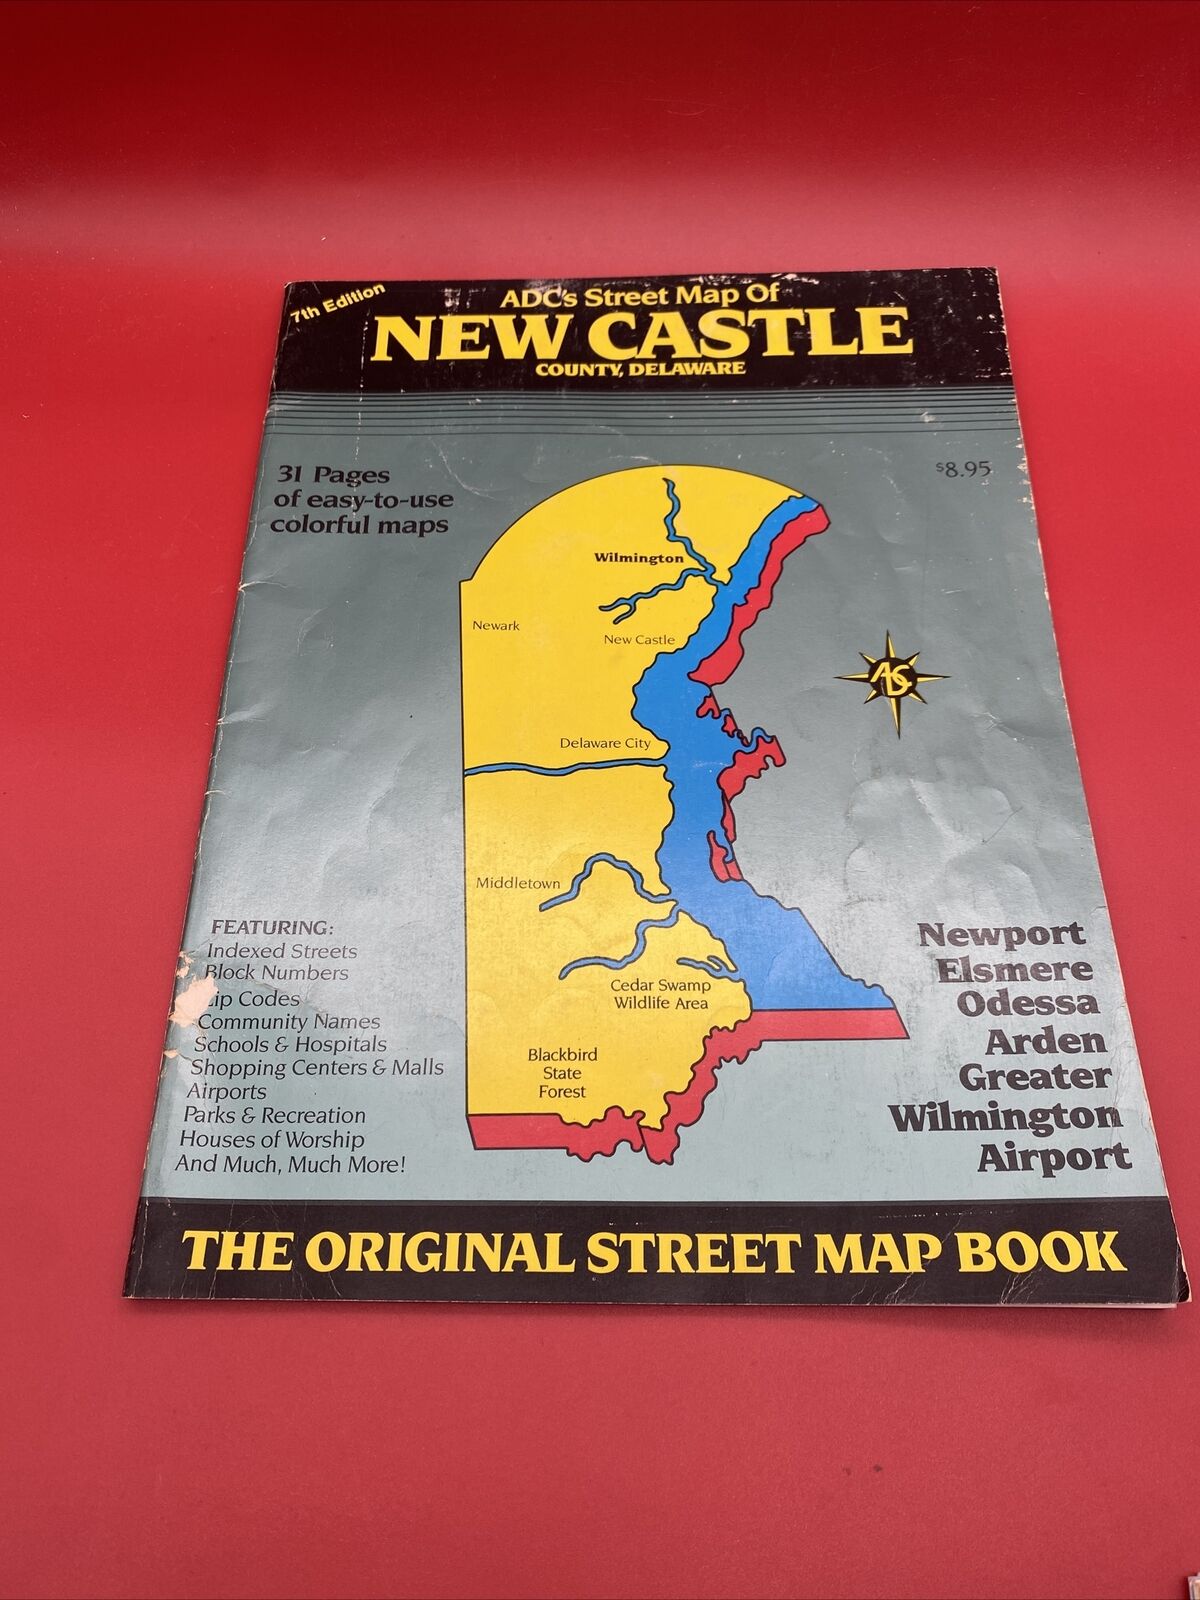 Vintage ADC’s Street Map Of New Castle County,Delaware-7th Edition